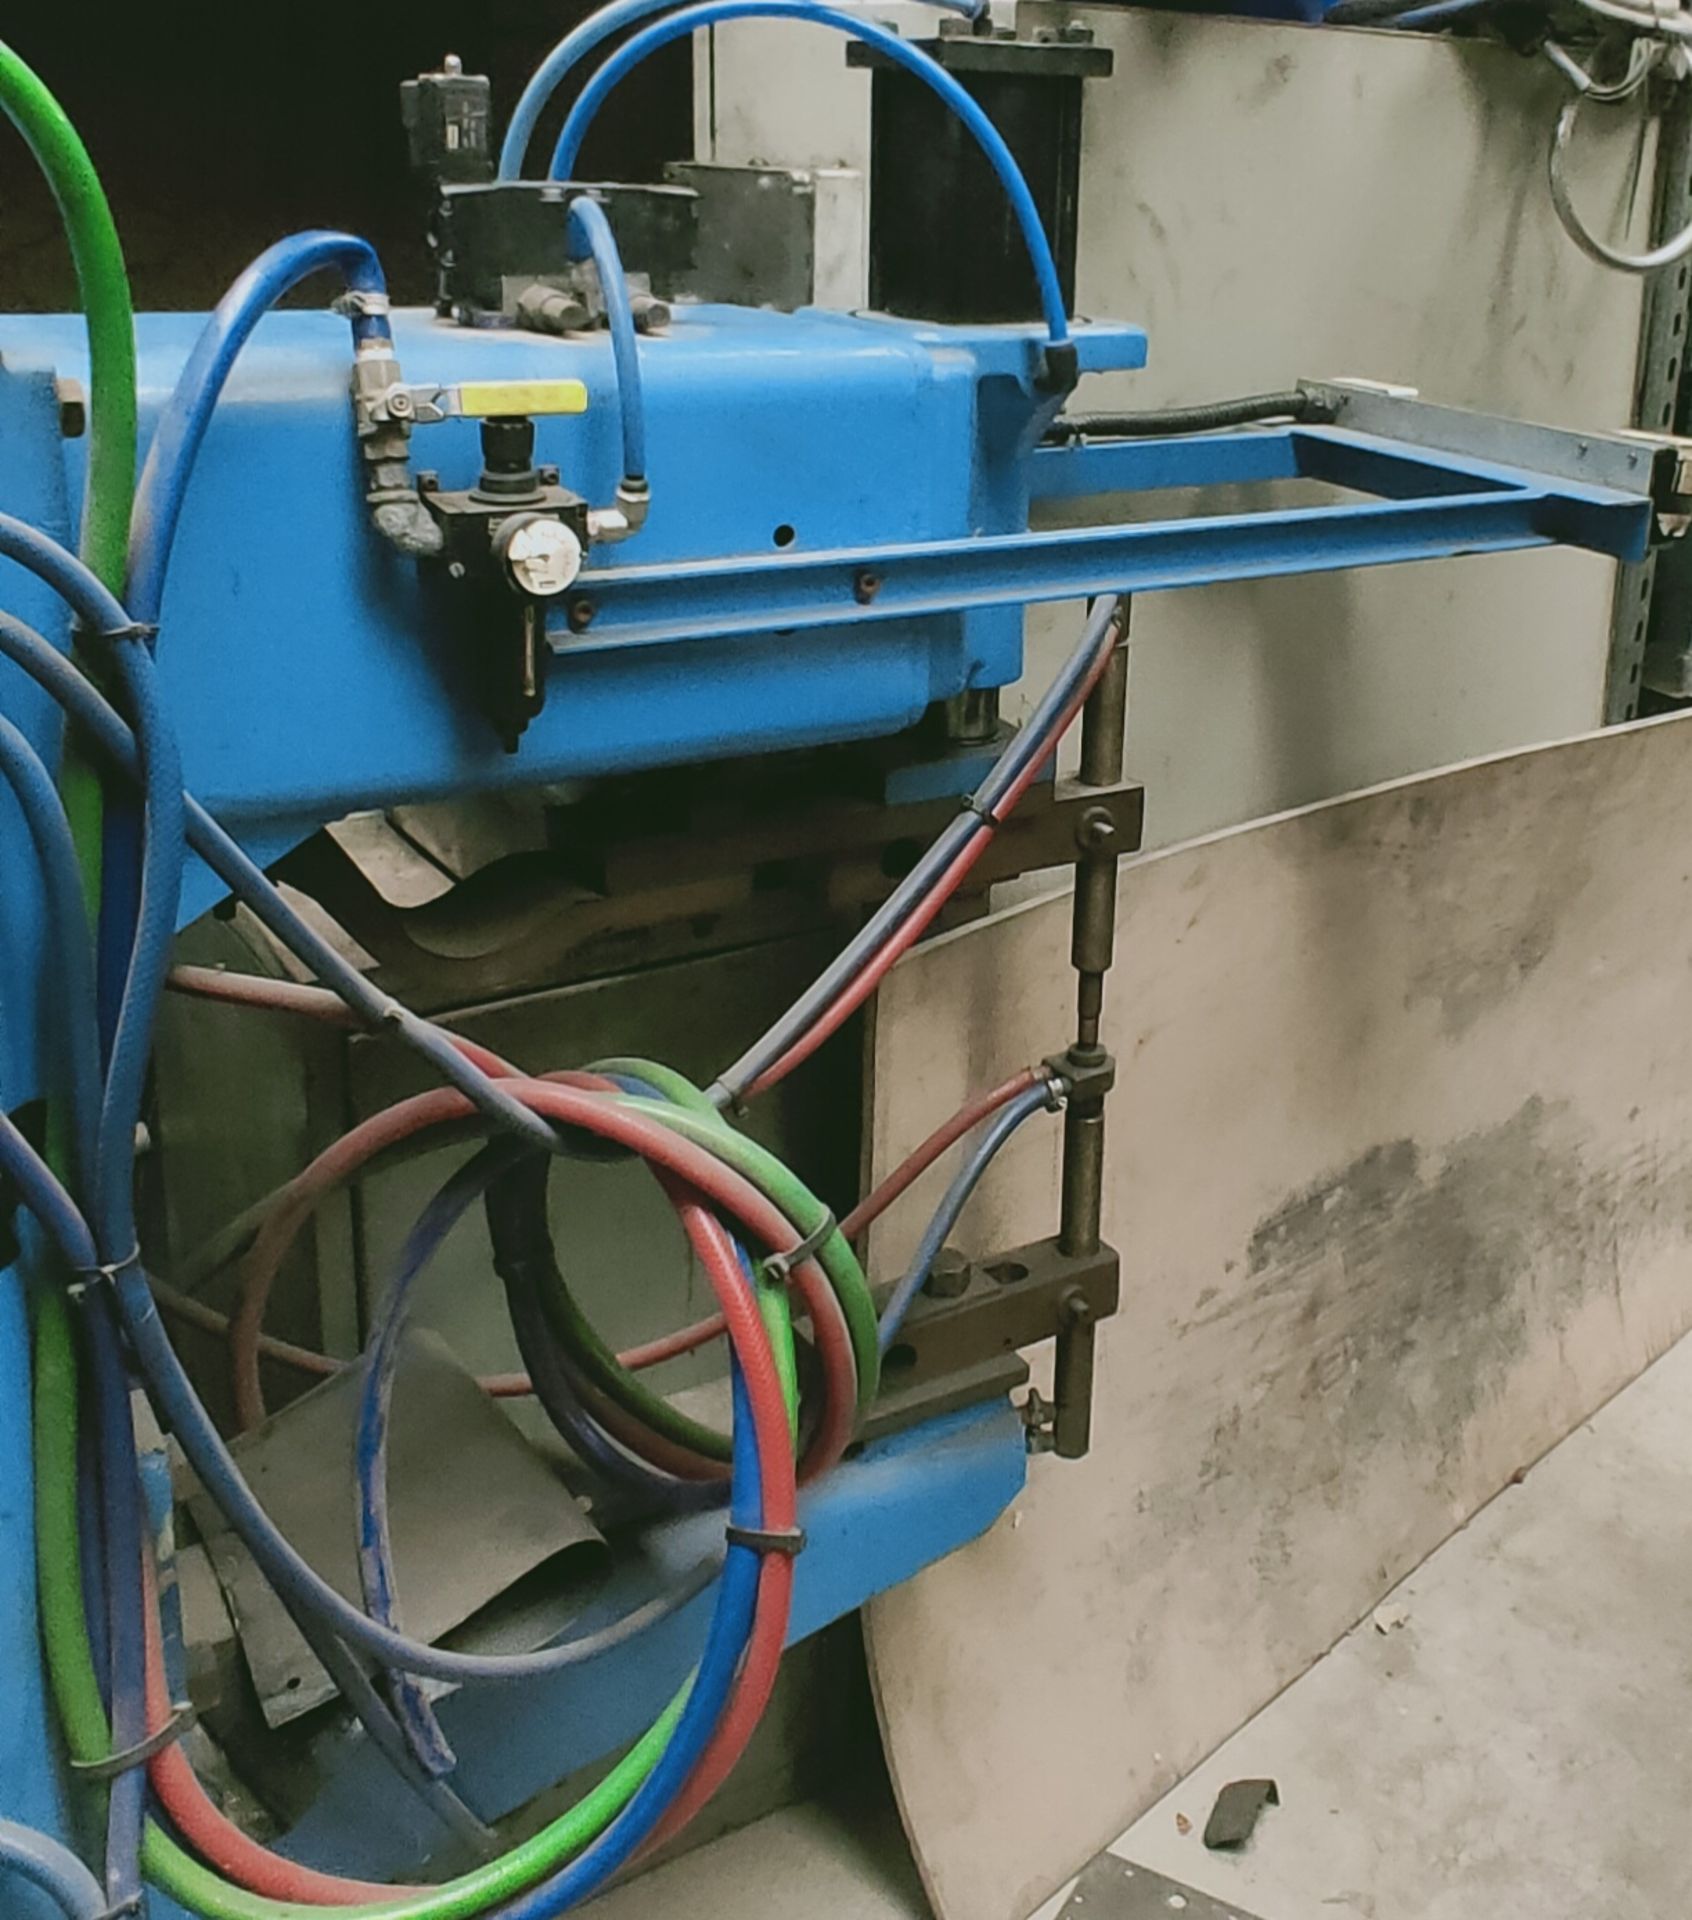 British Federal WS2000 Spot Welder, approx. 160cm x 180cm x 65cm, loading free of charge - yes ( - Image 2 of 5